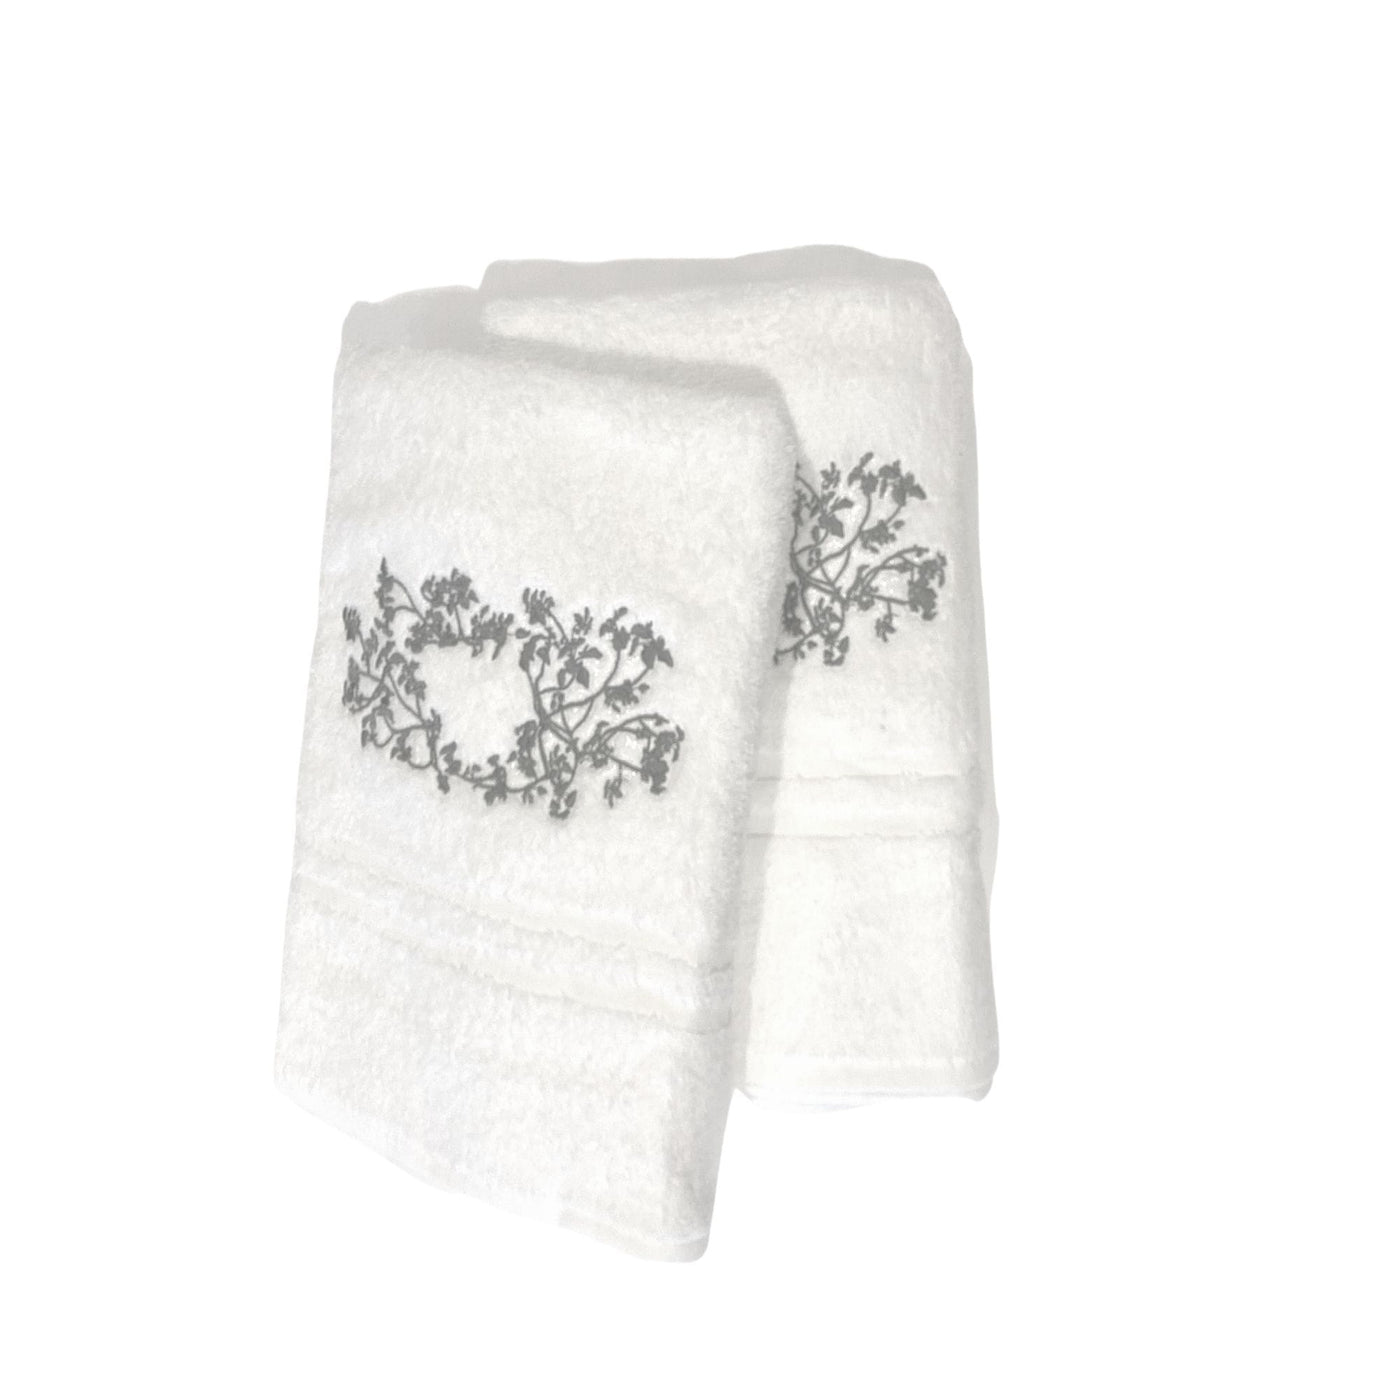 The Well at Cliff Robe Embroidered Bath Towels